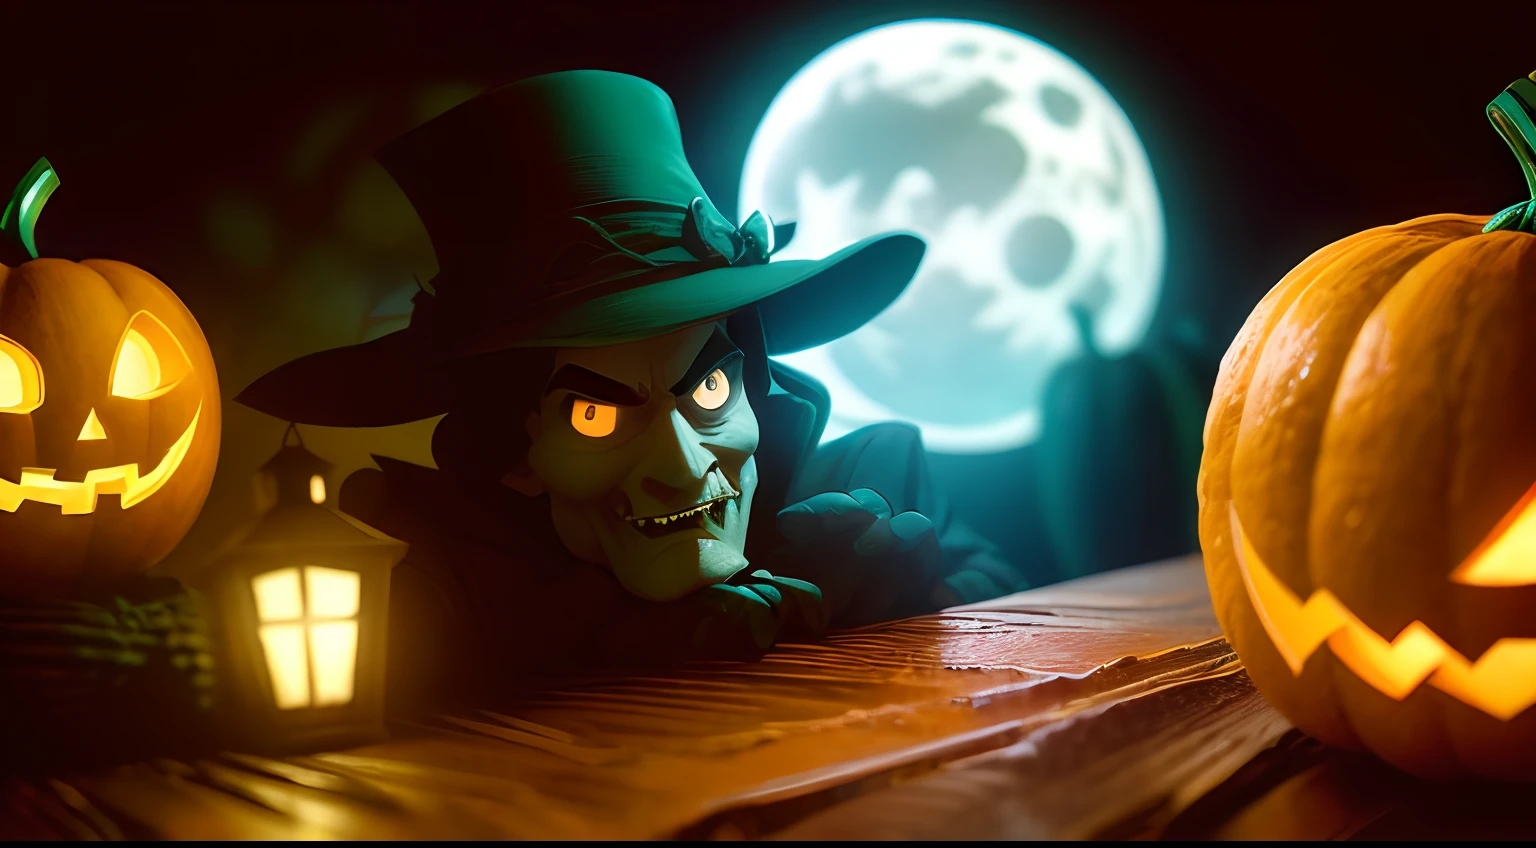 Create an image with a classic Disney-style American Halloween character, Jack O' Lanterna. Do not crop the image!! The scene is meant to be set in a Halloween-themed environment with pumpkins, Morcegos, e fantasmas decorando os arredores. Use cores tradicionais de Halloween, como laranja, preto, Purple, e verde. The image must be of maximum definition quality, com detalhes intrincados sobre o personagem e o ambiente. A cena deve incluir elementos como teias de aranha, Illuminated Pumpkin Lanterns, And a full moon in the night sky. The image should capture the essence and charm of American Halloween, evoking a sense of mystery and fun. Make sure all elements complement each other to create a visually appealing composition, staying true to the Disney aesthetic. Pay attention to the character's facial expressions and body language to convey a playful and